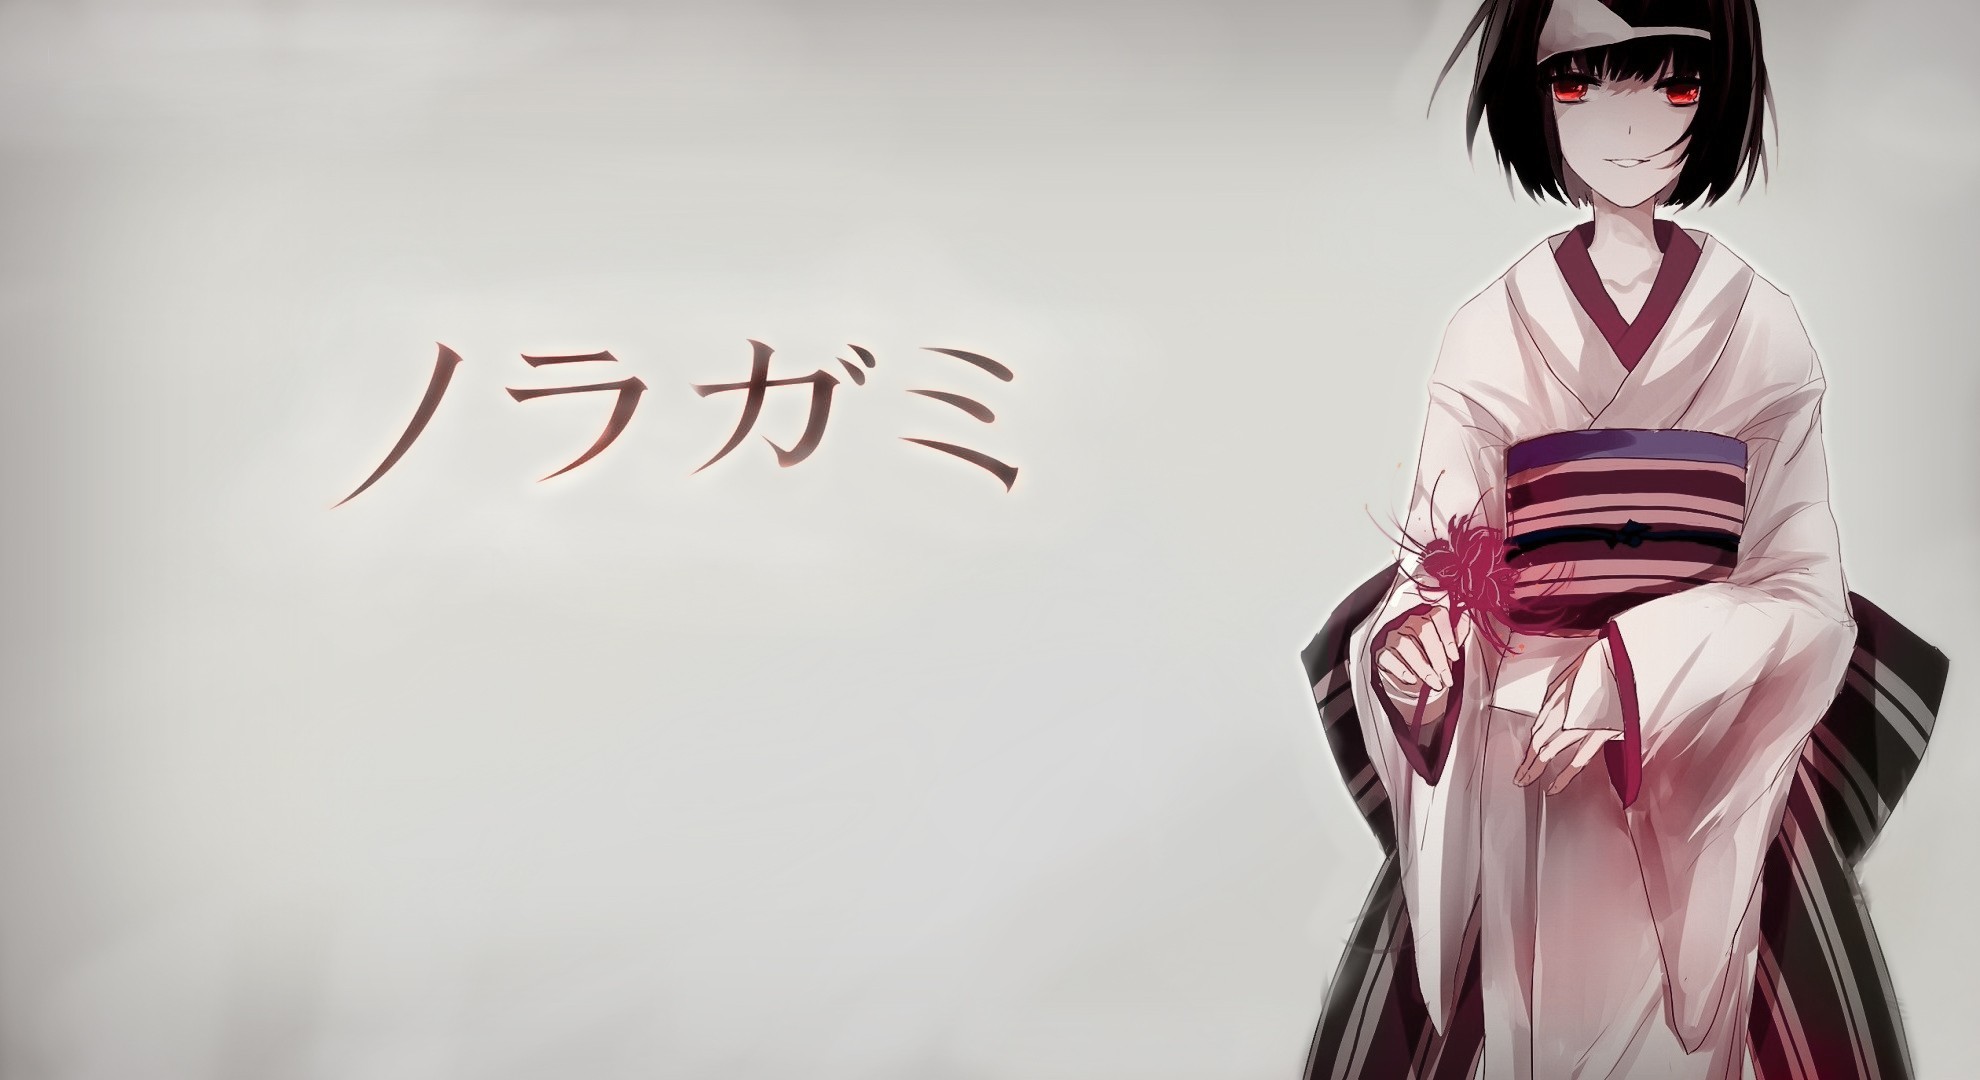 1980x1080 160 best images about Noragami on Pinterest | Noragami anime .